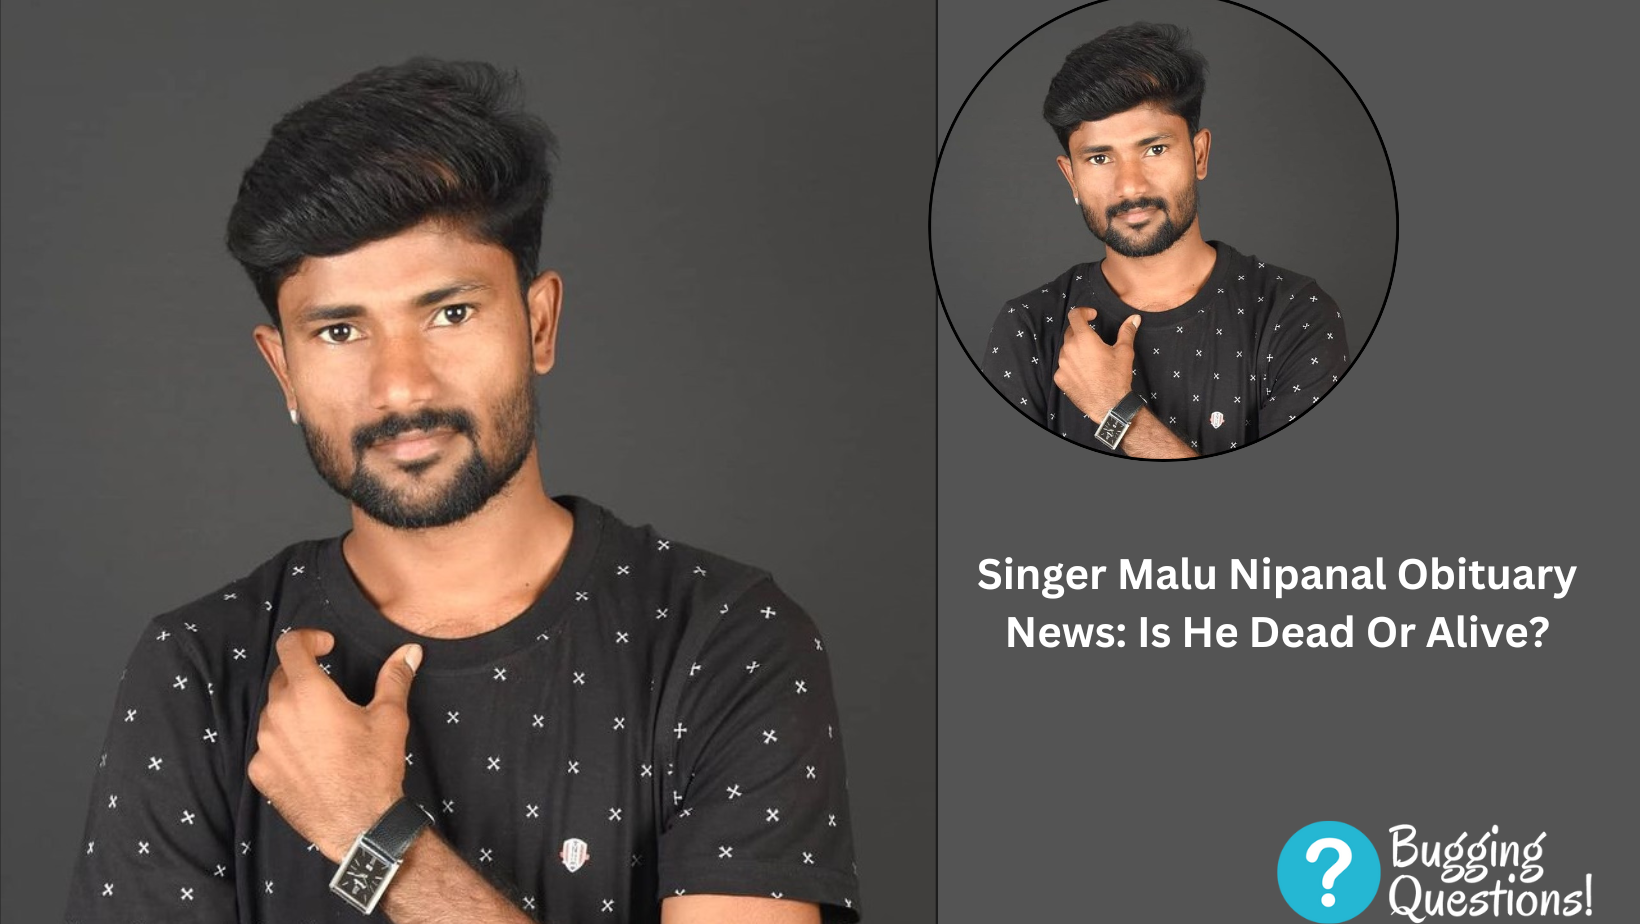 Singer Malu Nipanal Obituary News: Is He Dead Or Alive?